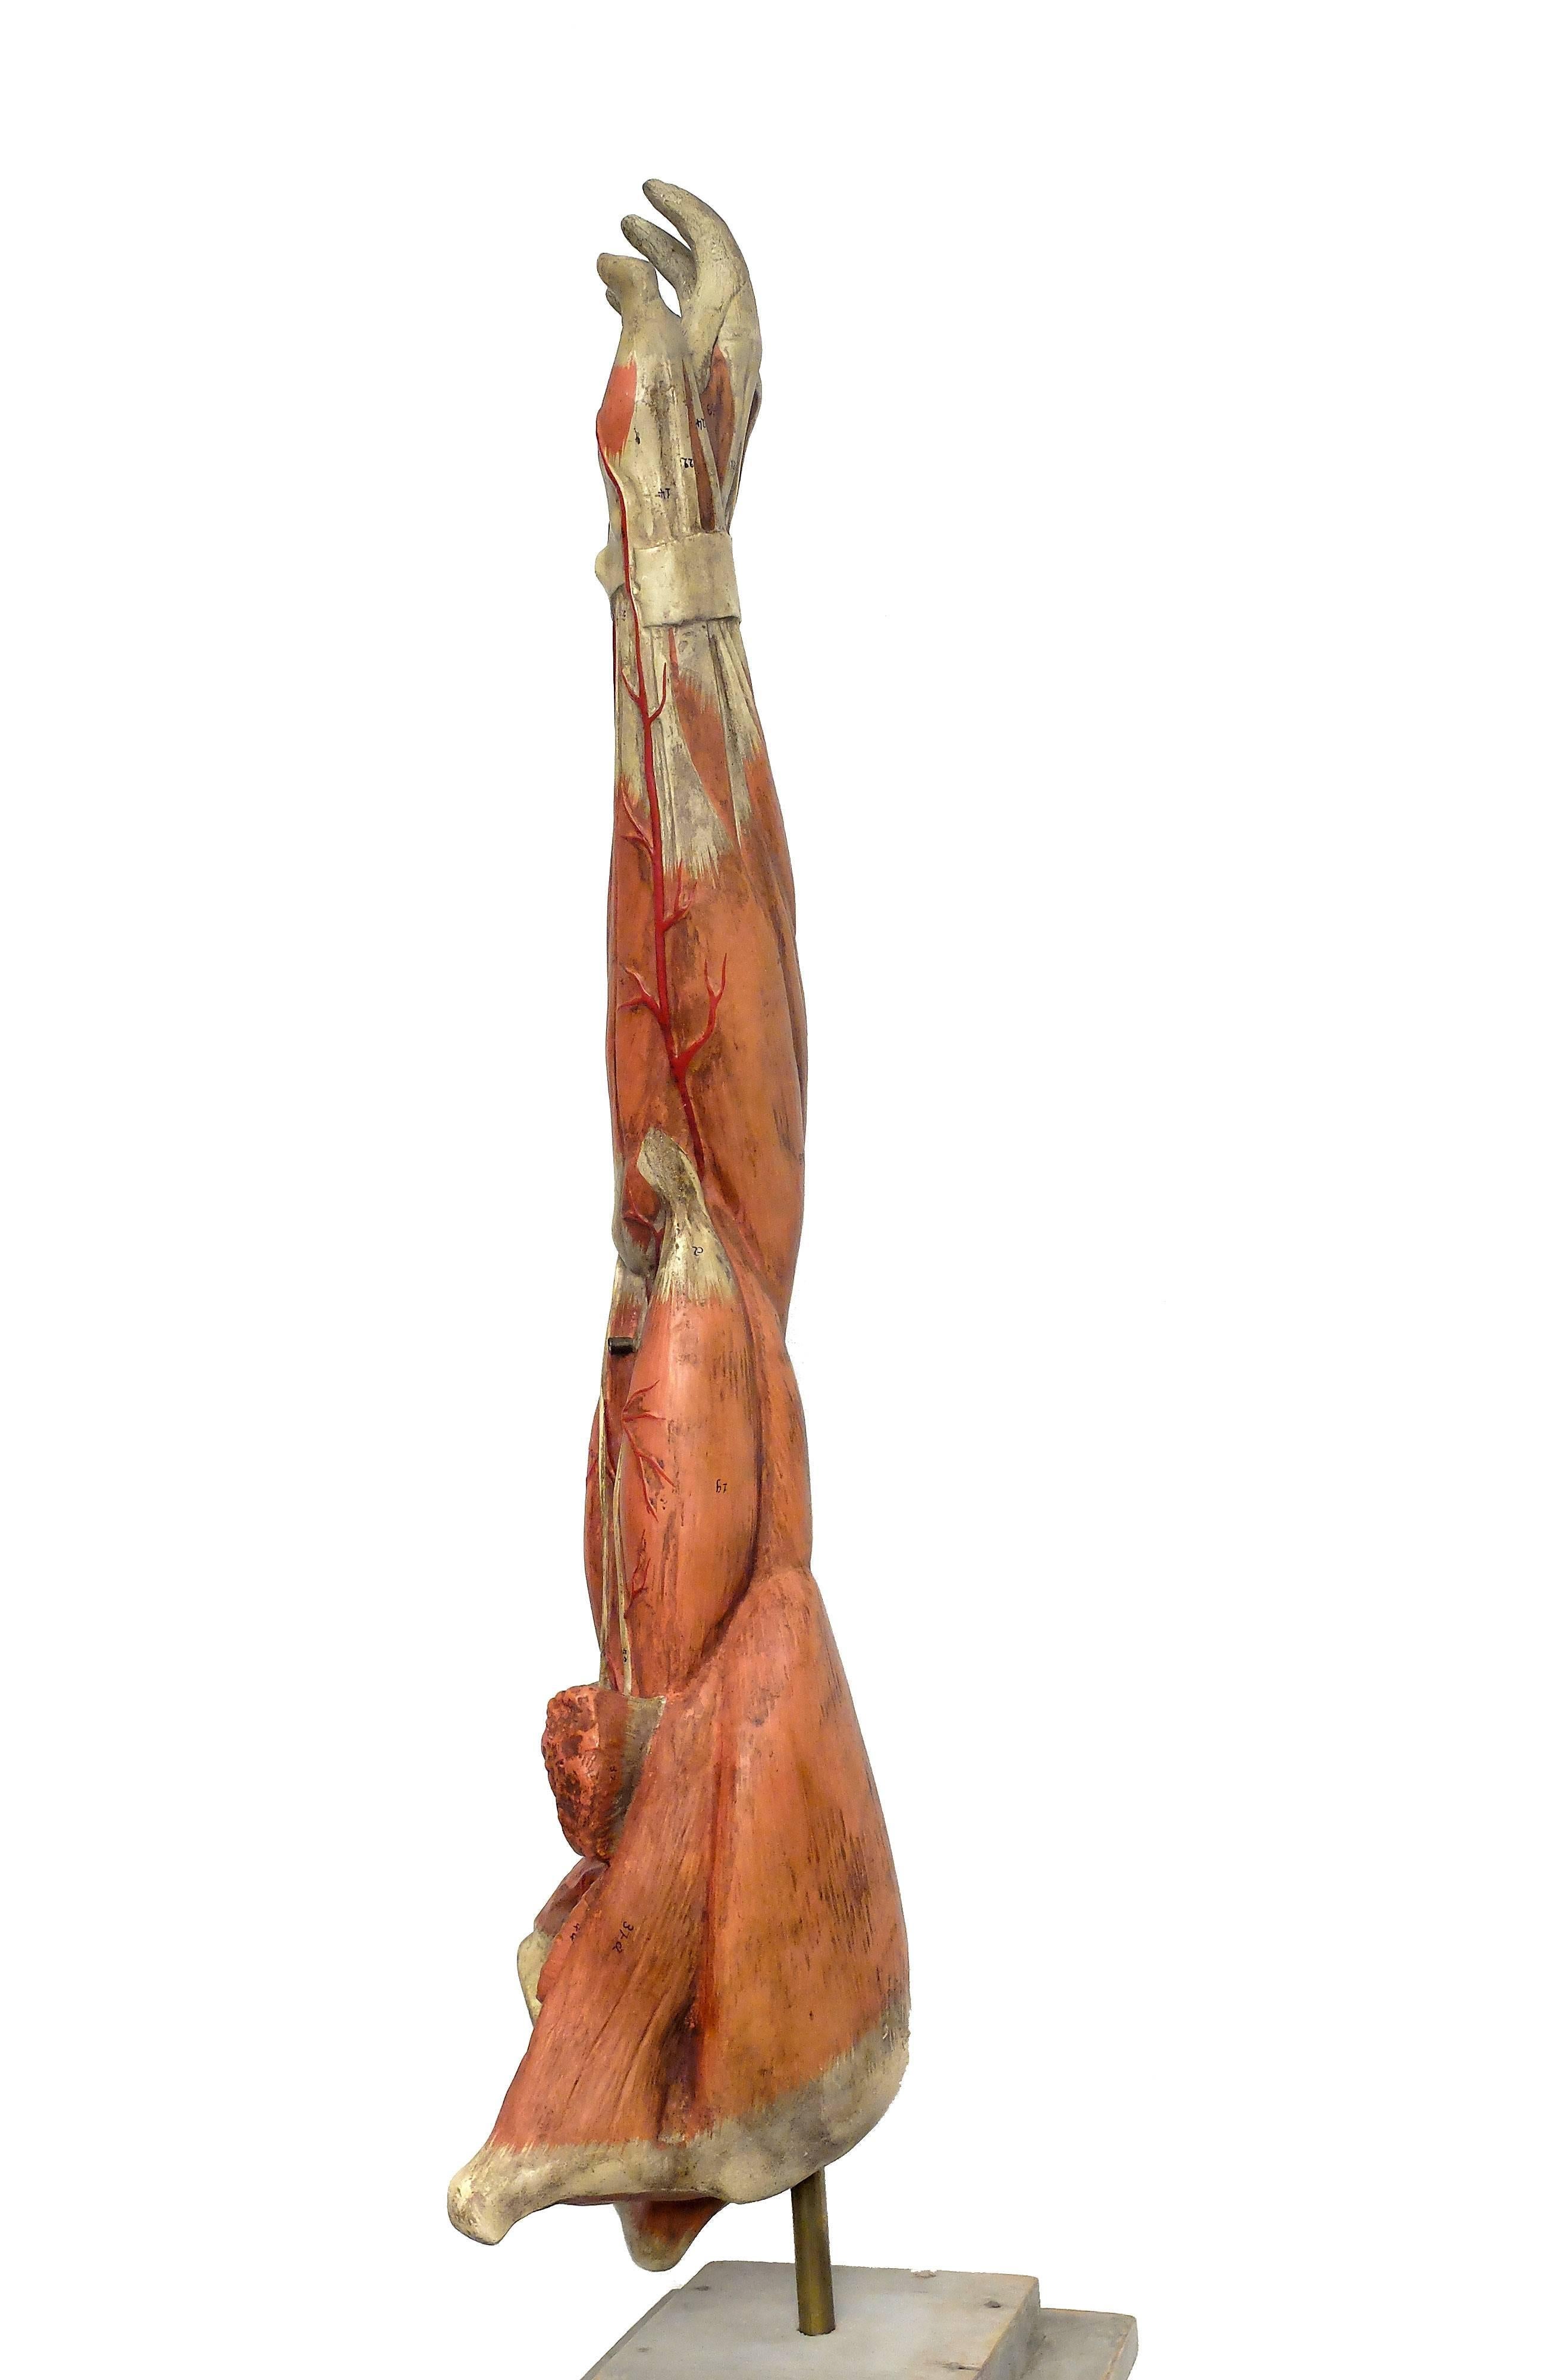 Late 19th Century Anatomical Model of an Entire Arm Made by Paravia, Milano, Italy, circa 1890